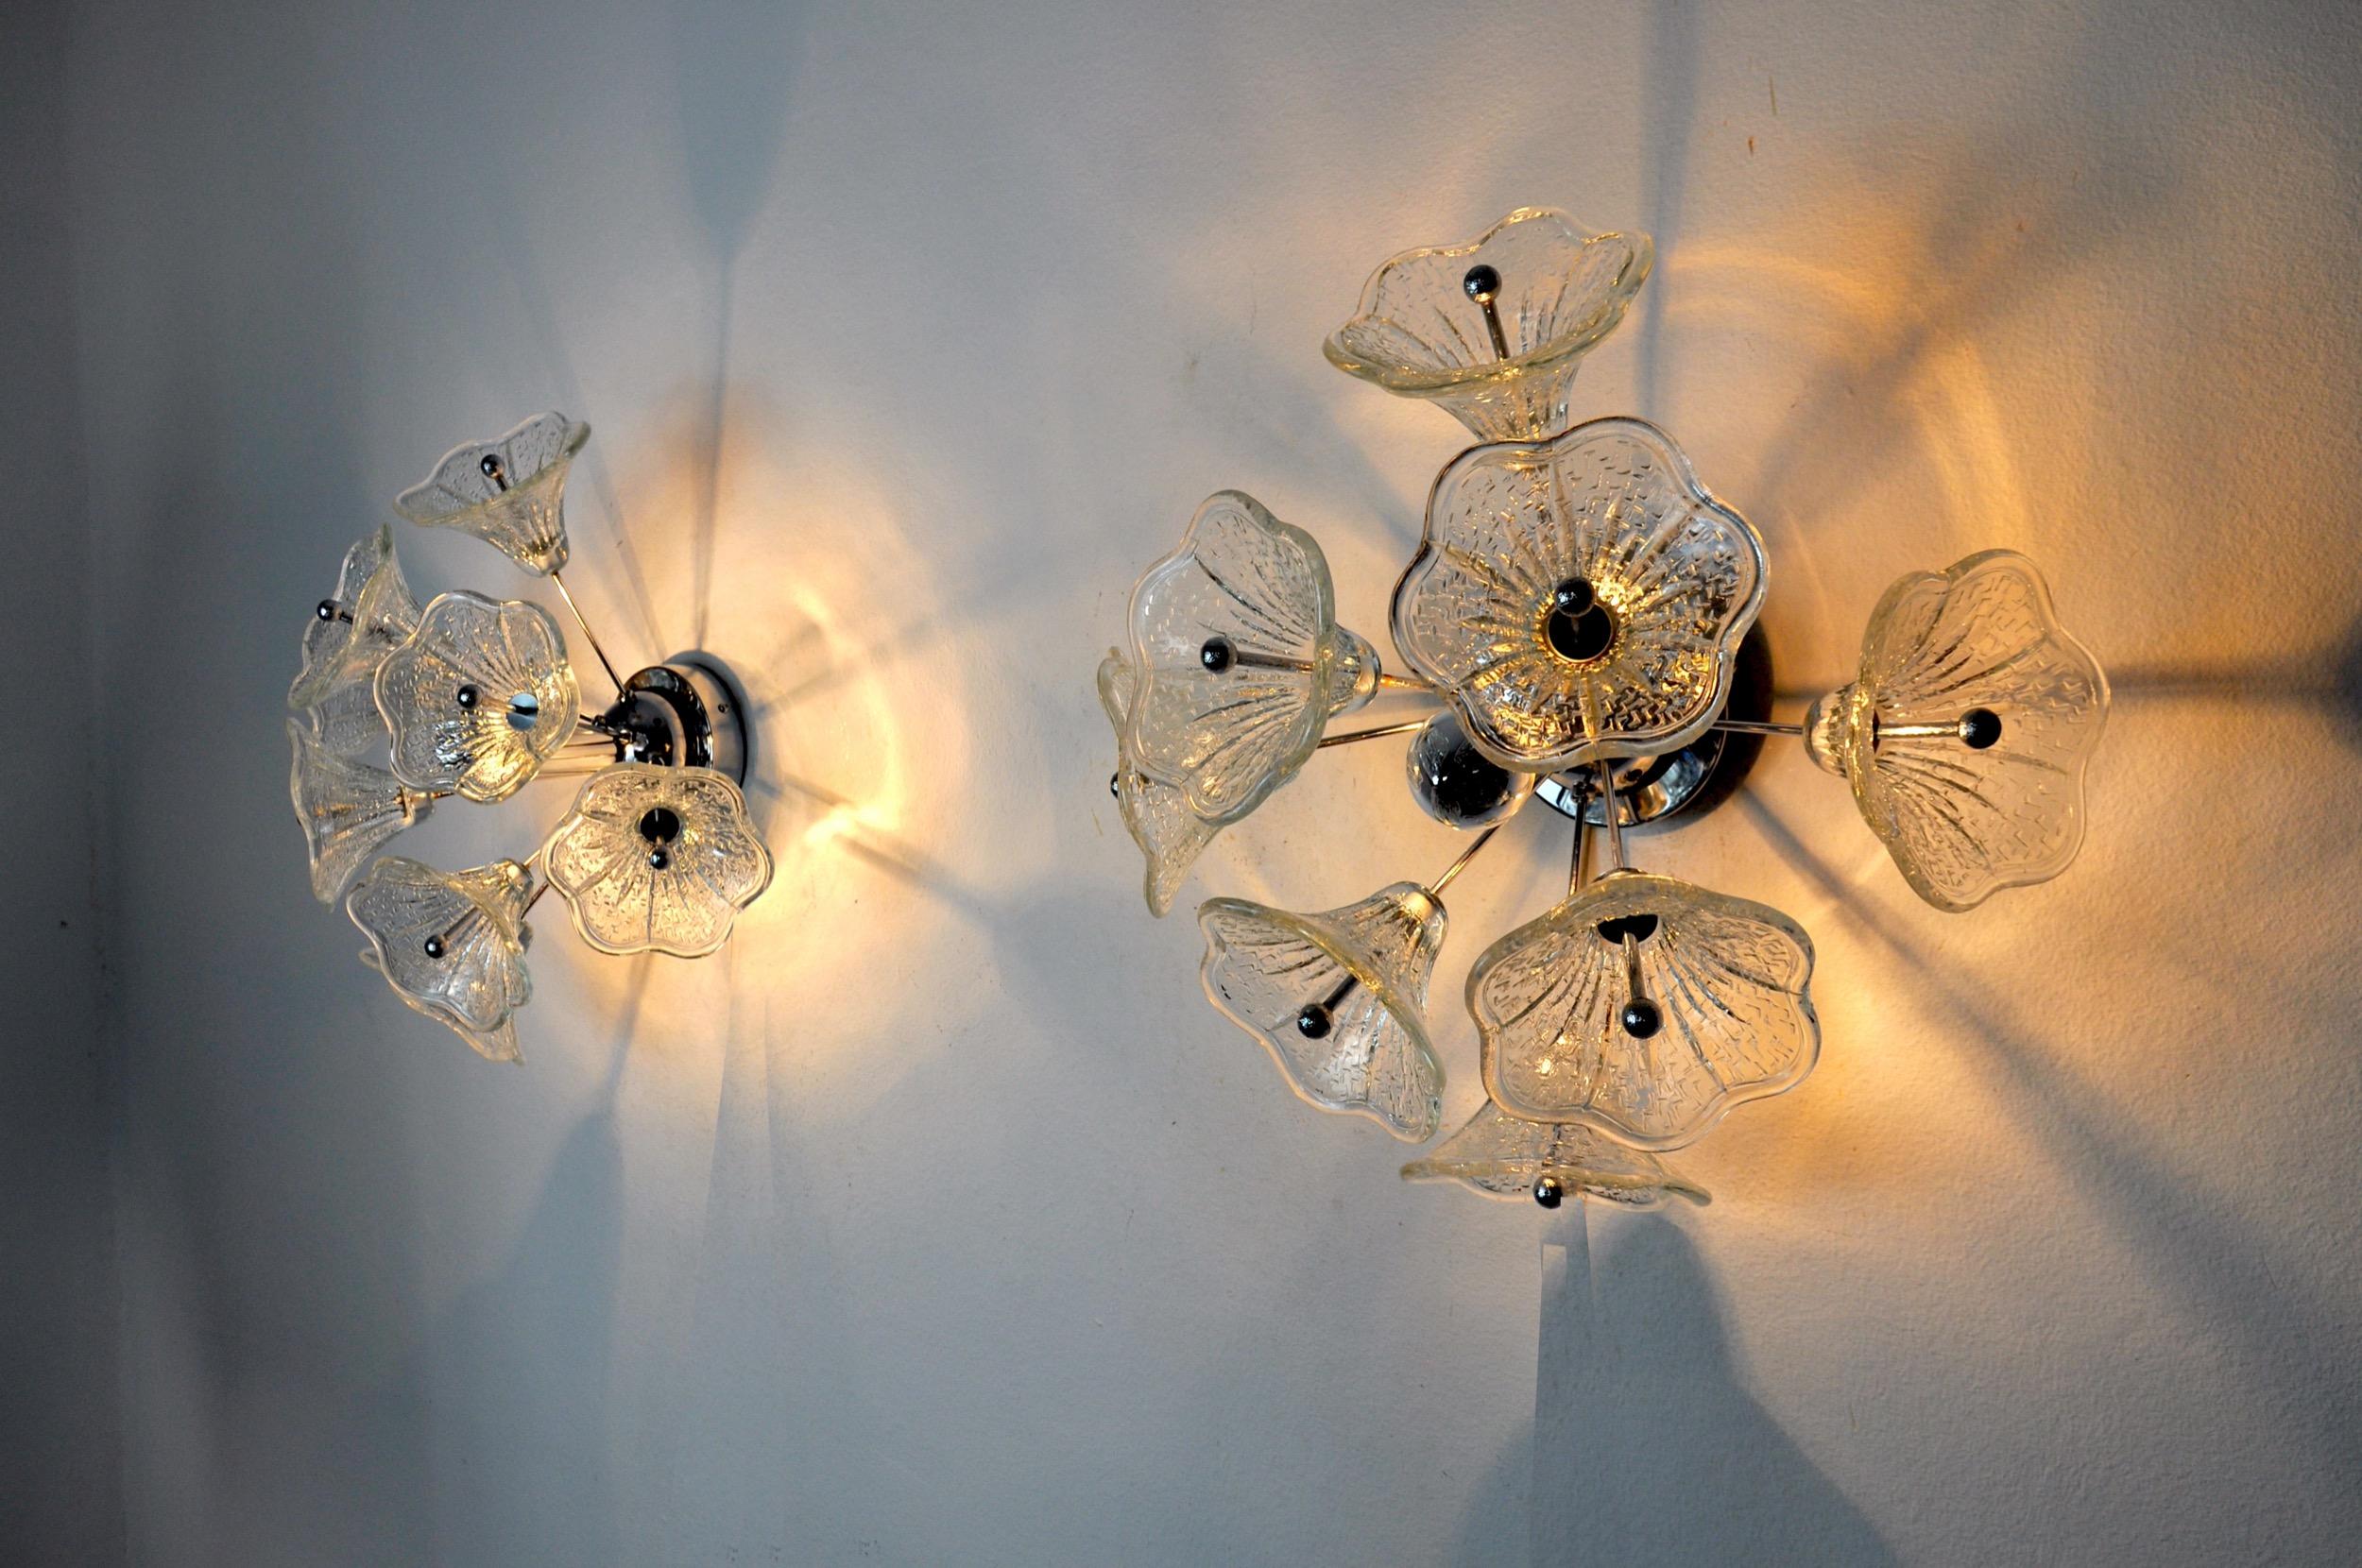 Superb and rare pair of sputnik sconces designed and produced by murano mazzega in italy in the 1970s.

These two sconces are composed of 8 arms each supporting a flower made of murano glass.

Rare design object that will illuminate your